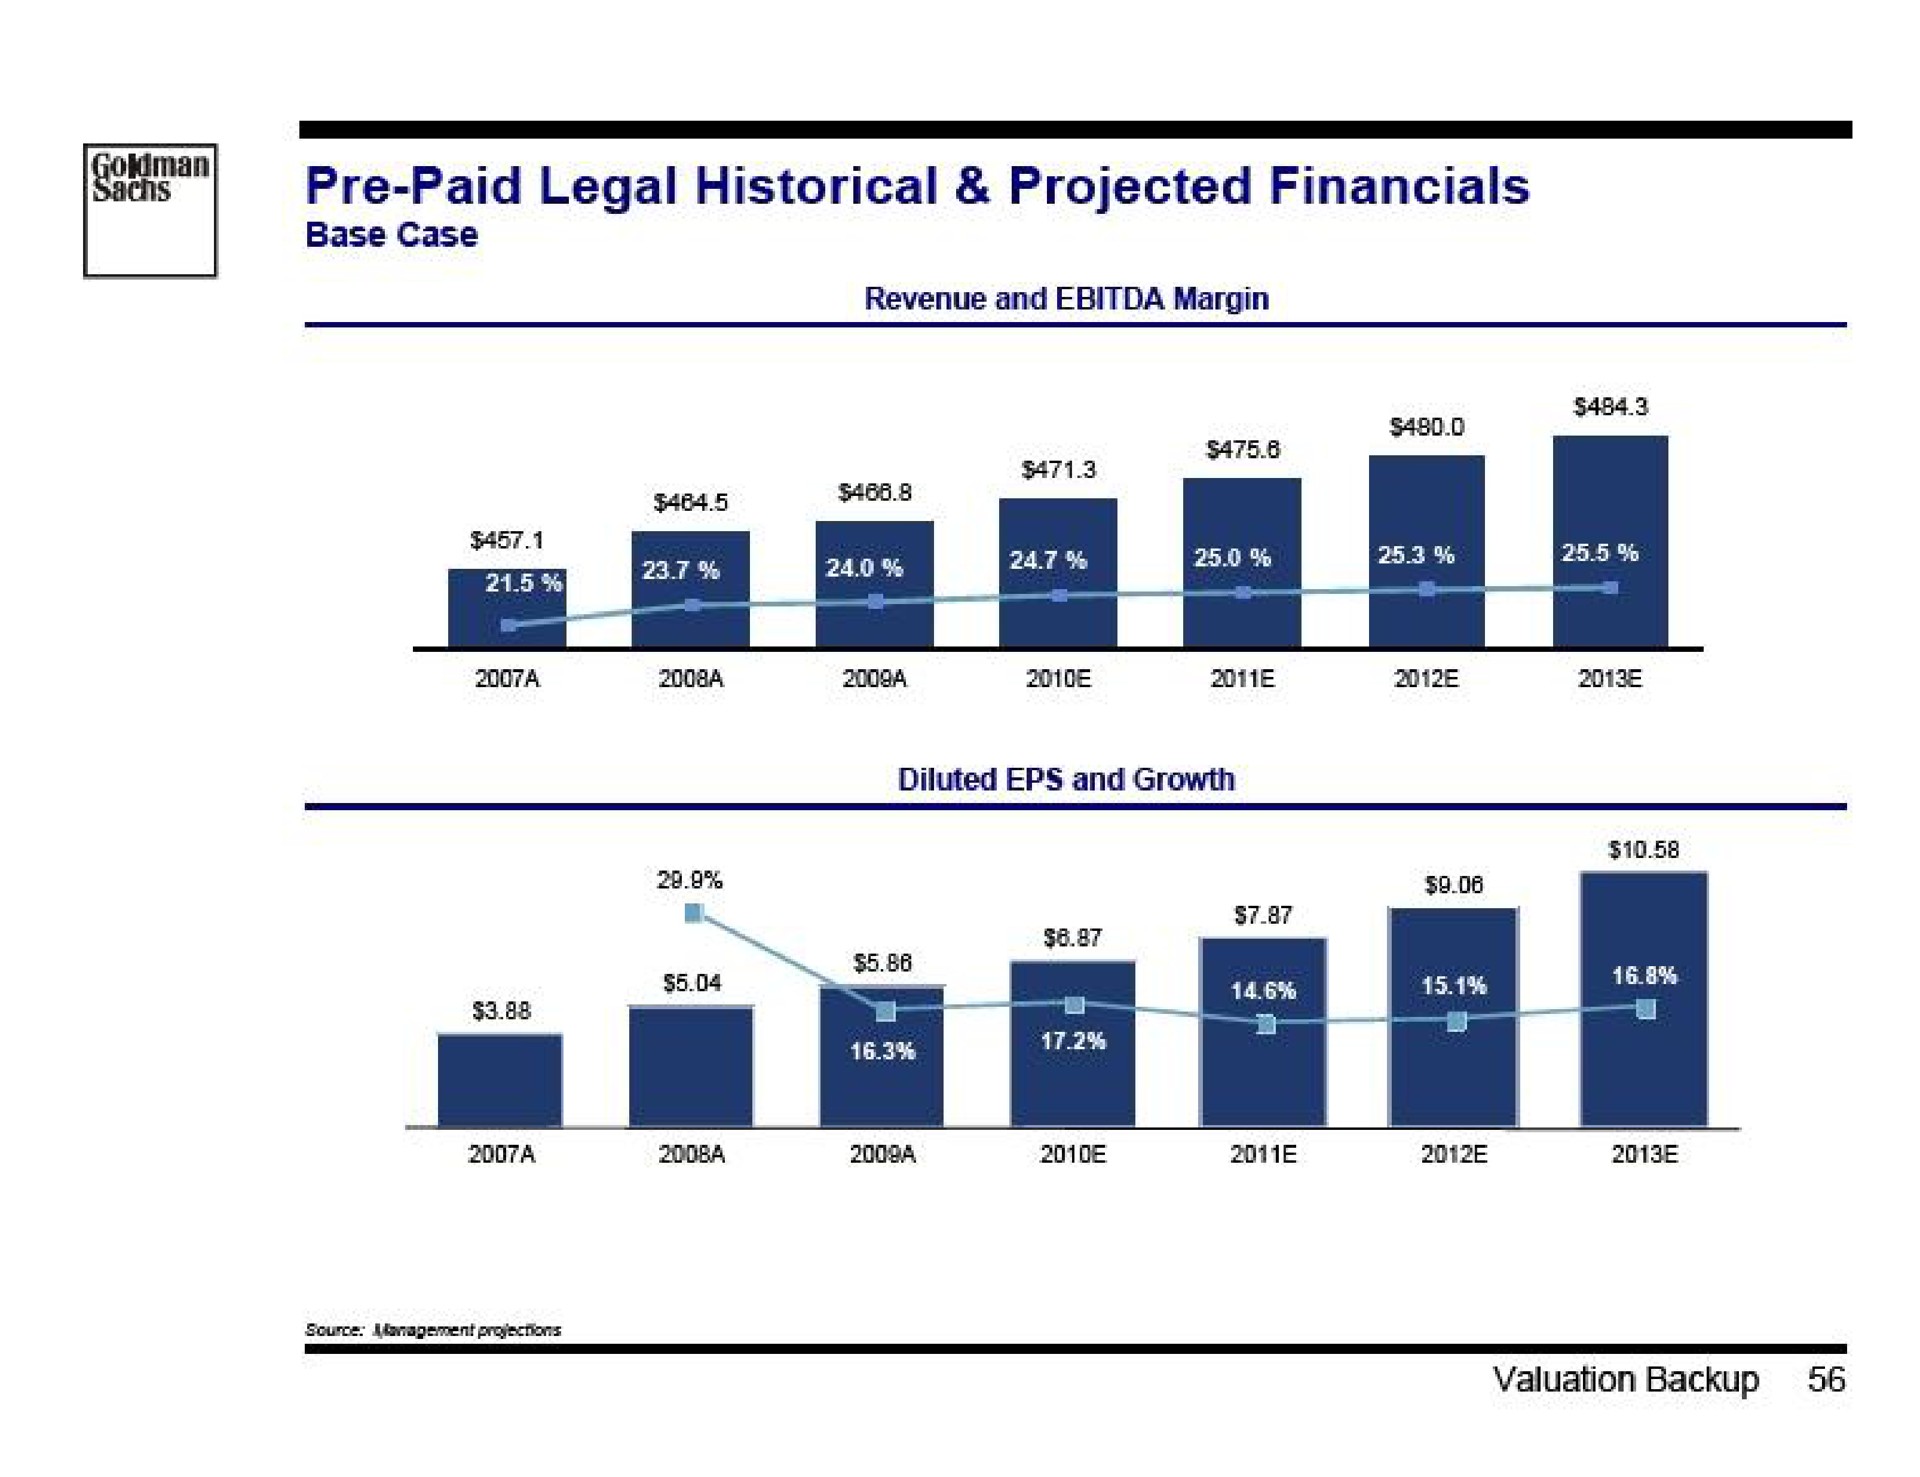 paid legal historical projected valuation backup | Goldman Sachs